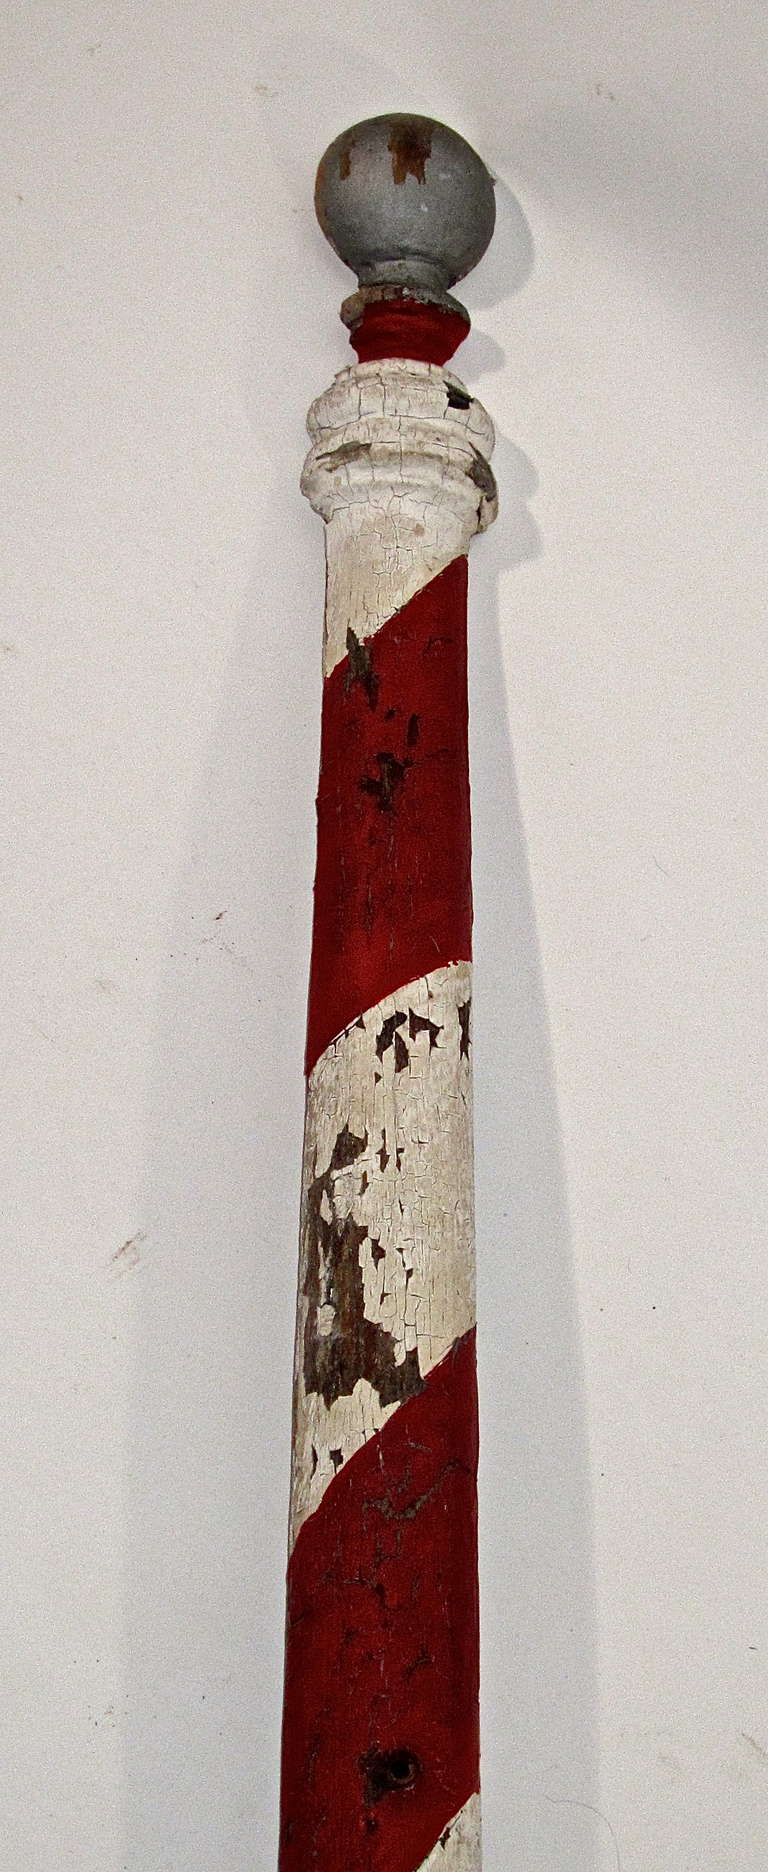 This charming slender half round barber pole is in   original painted surface . Sleek and slender, an atypical example of Americana.Trade signs designed and produced by craftsmen,